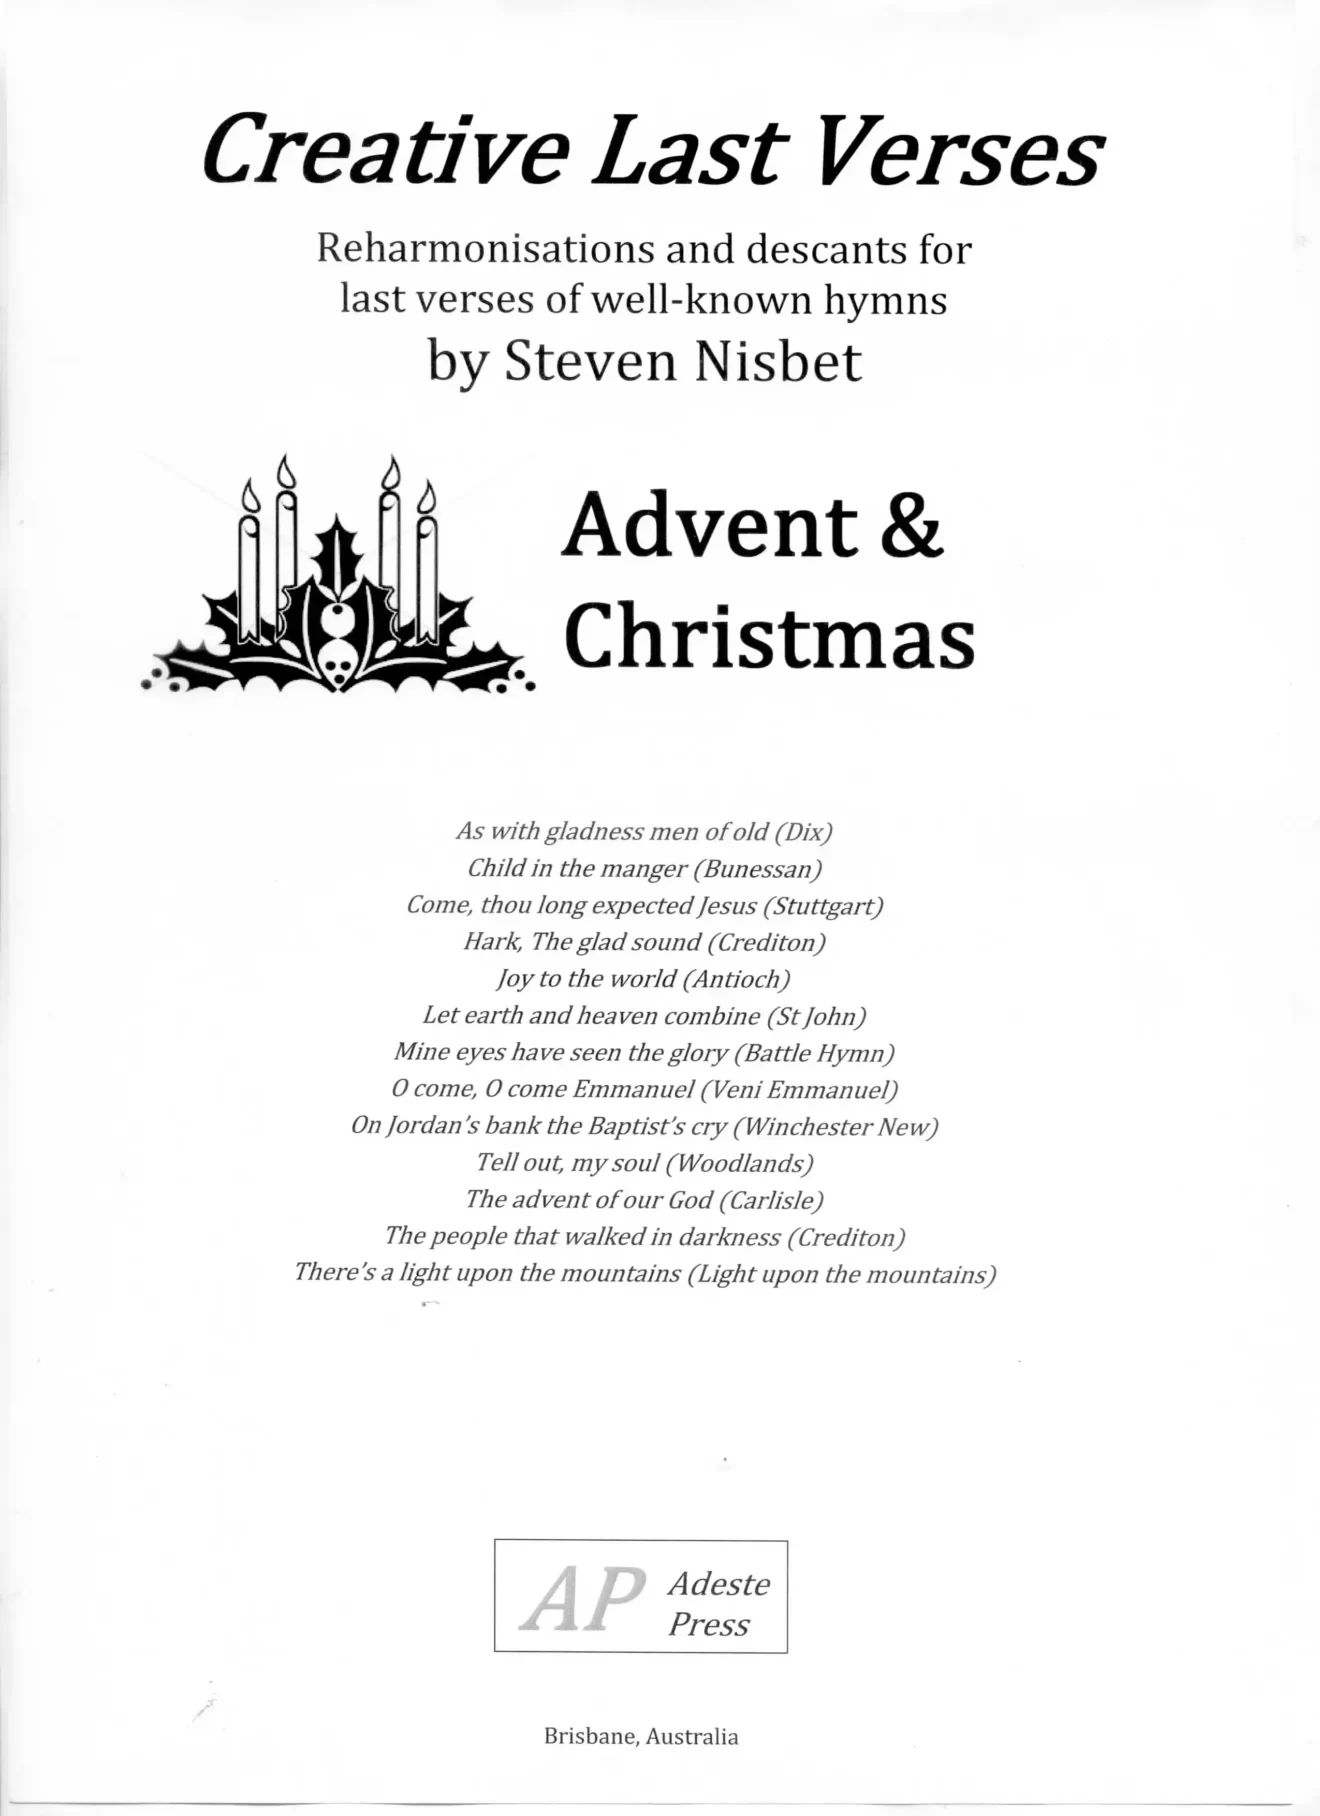 front cover image of Creative Last Verses Booklet 1 Advent Christmas_Steven Nisbet